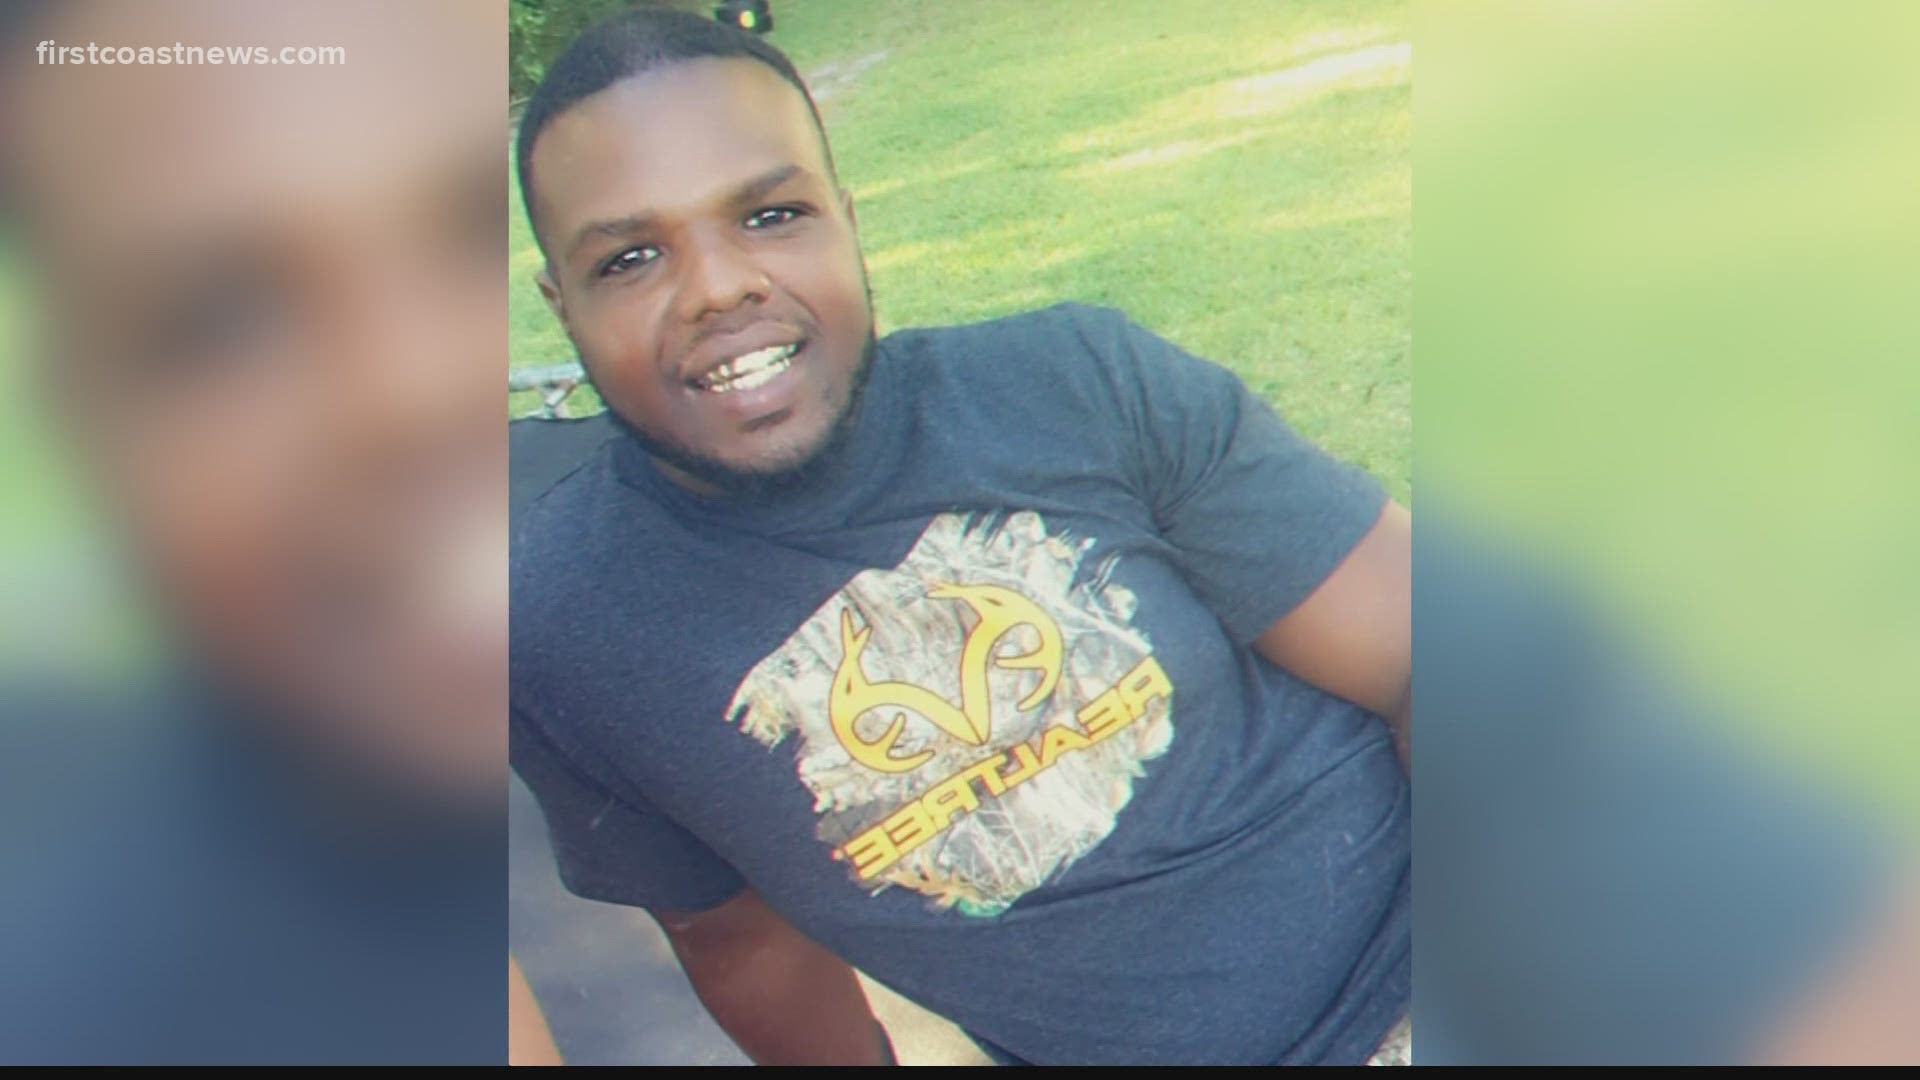 Once inside the house, police found 31-year-old Demetri Jaron Blount dead on a living room couch with a gunshot wound to his torso.